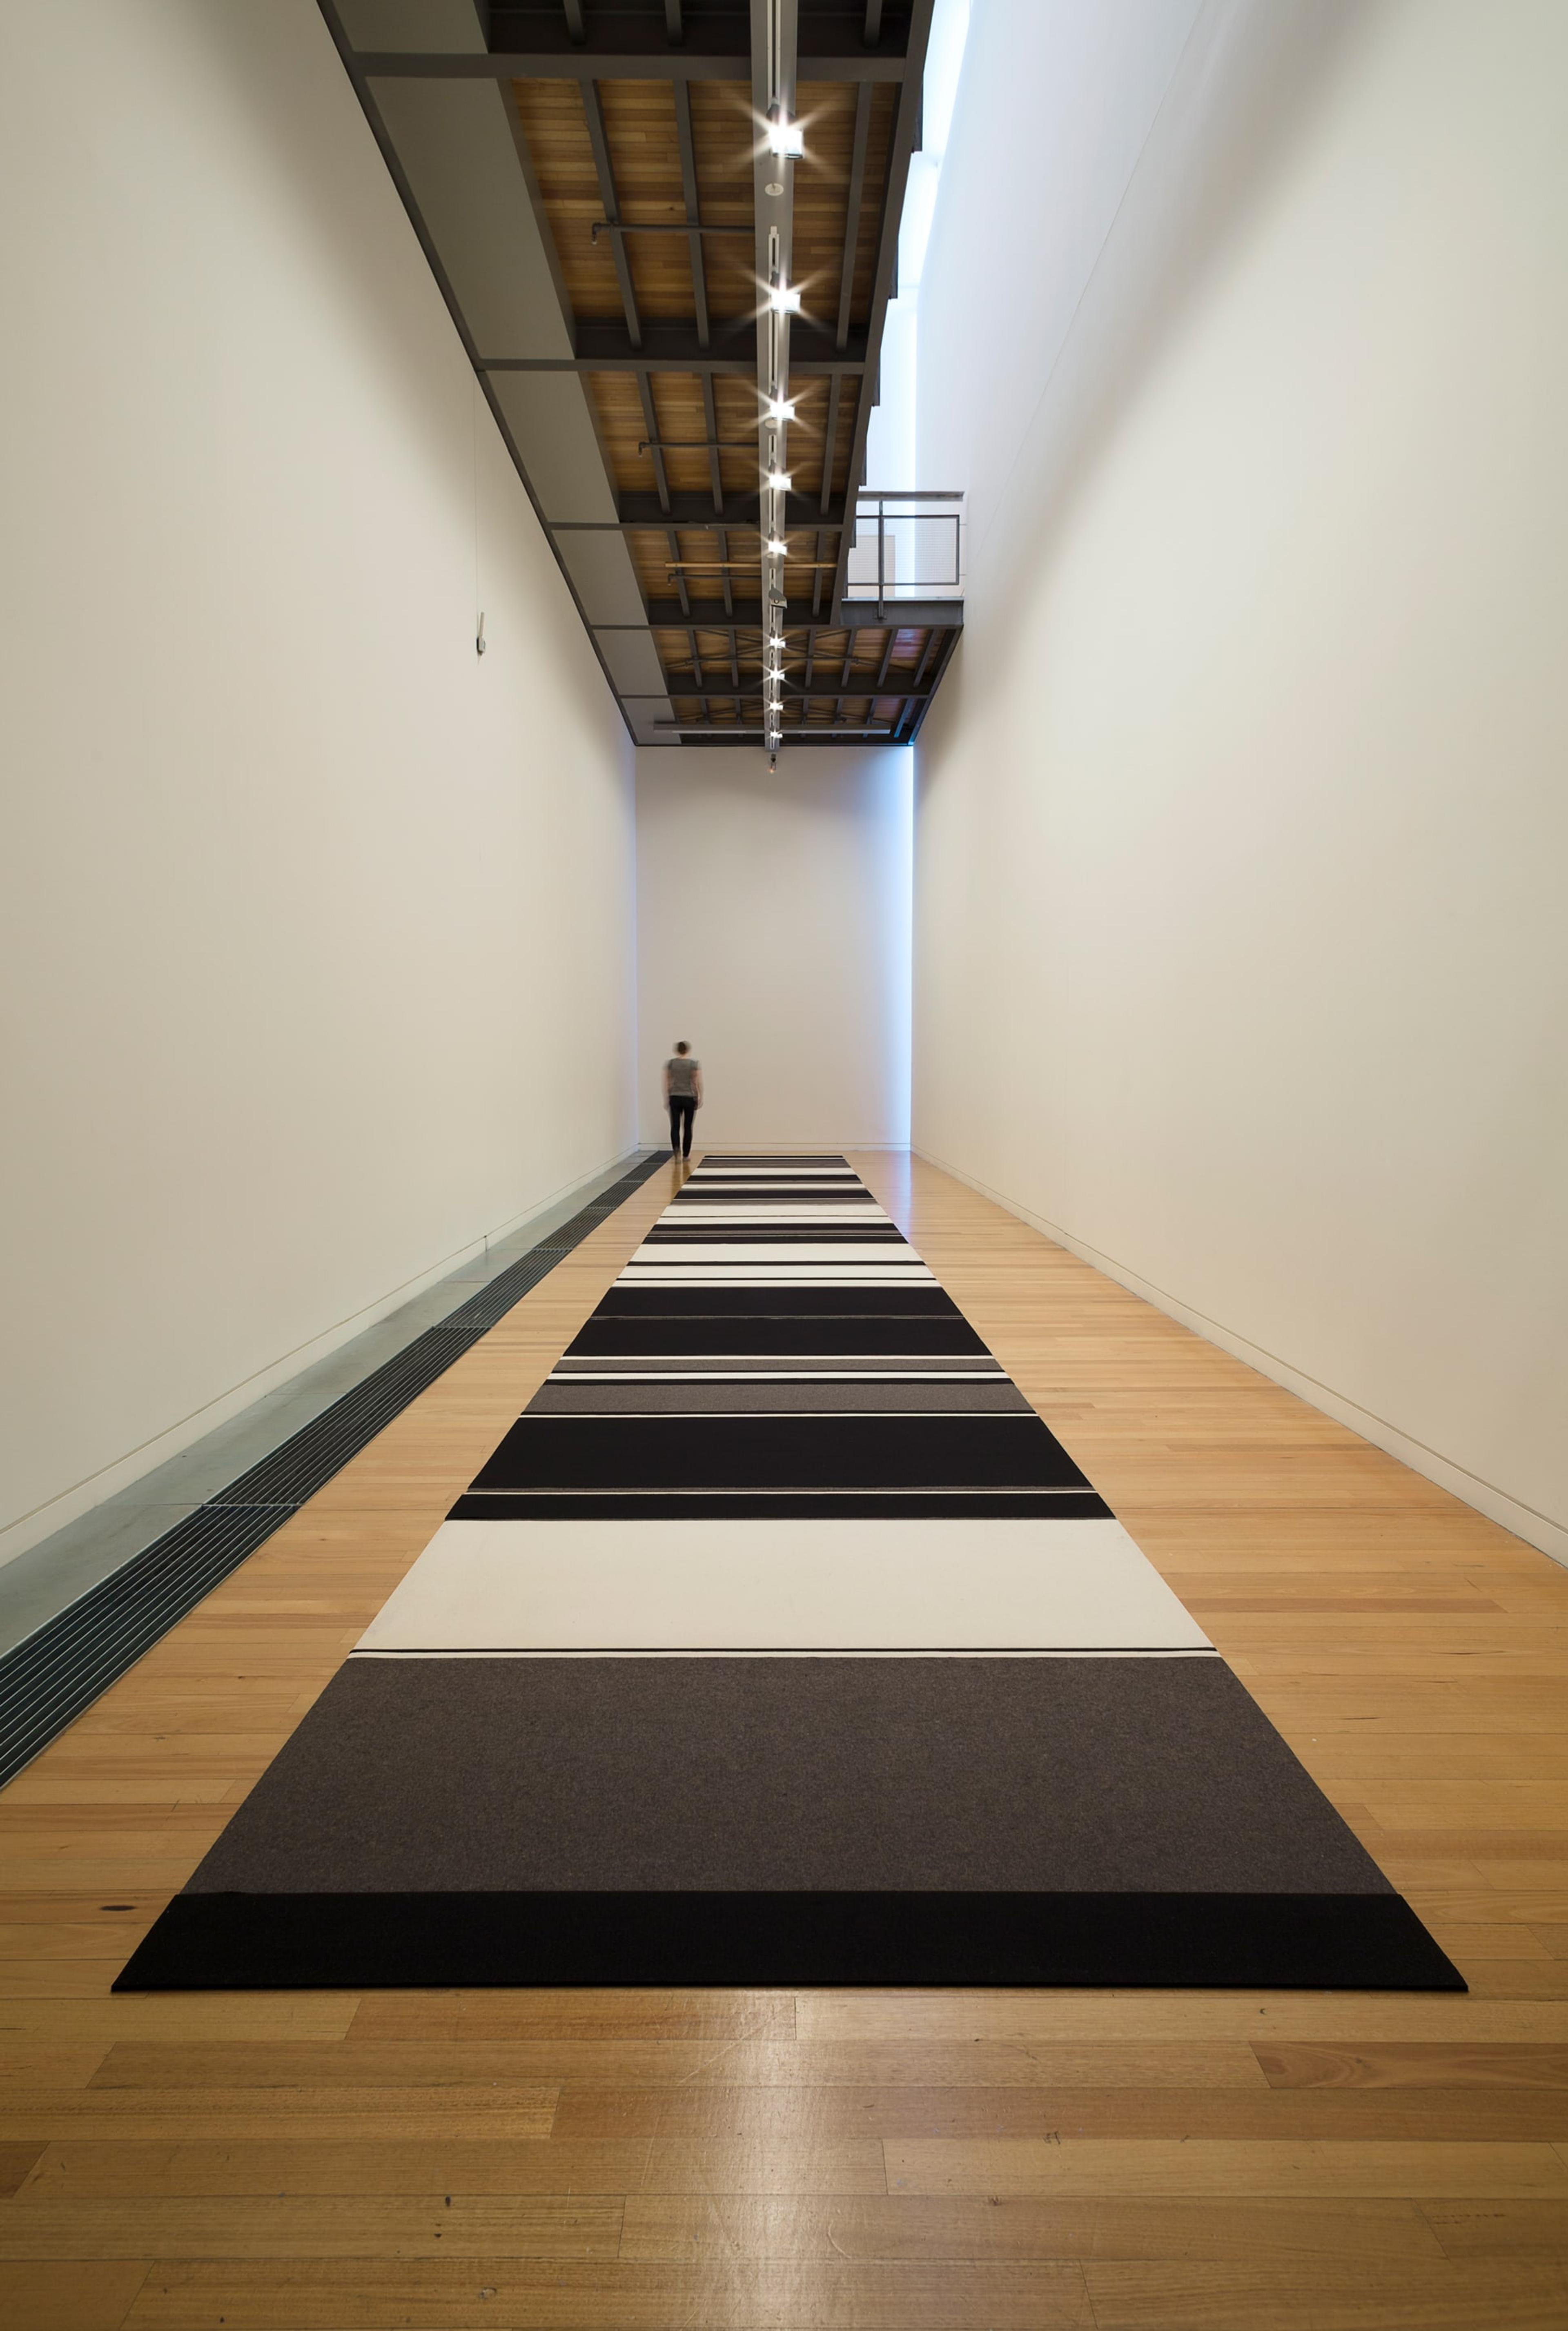 Installation view of Peter Robinson: Cuts and Junctures at the Adam Art Gallery. Photo: Shaun Waugh.